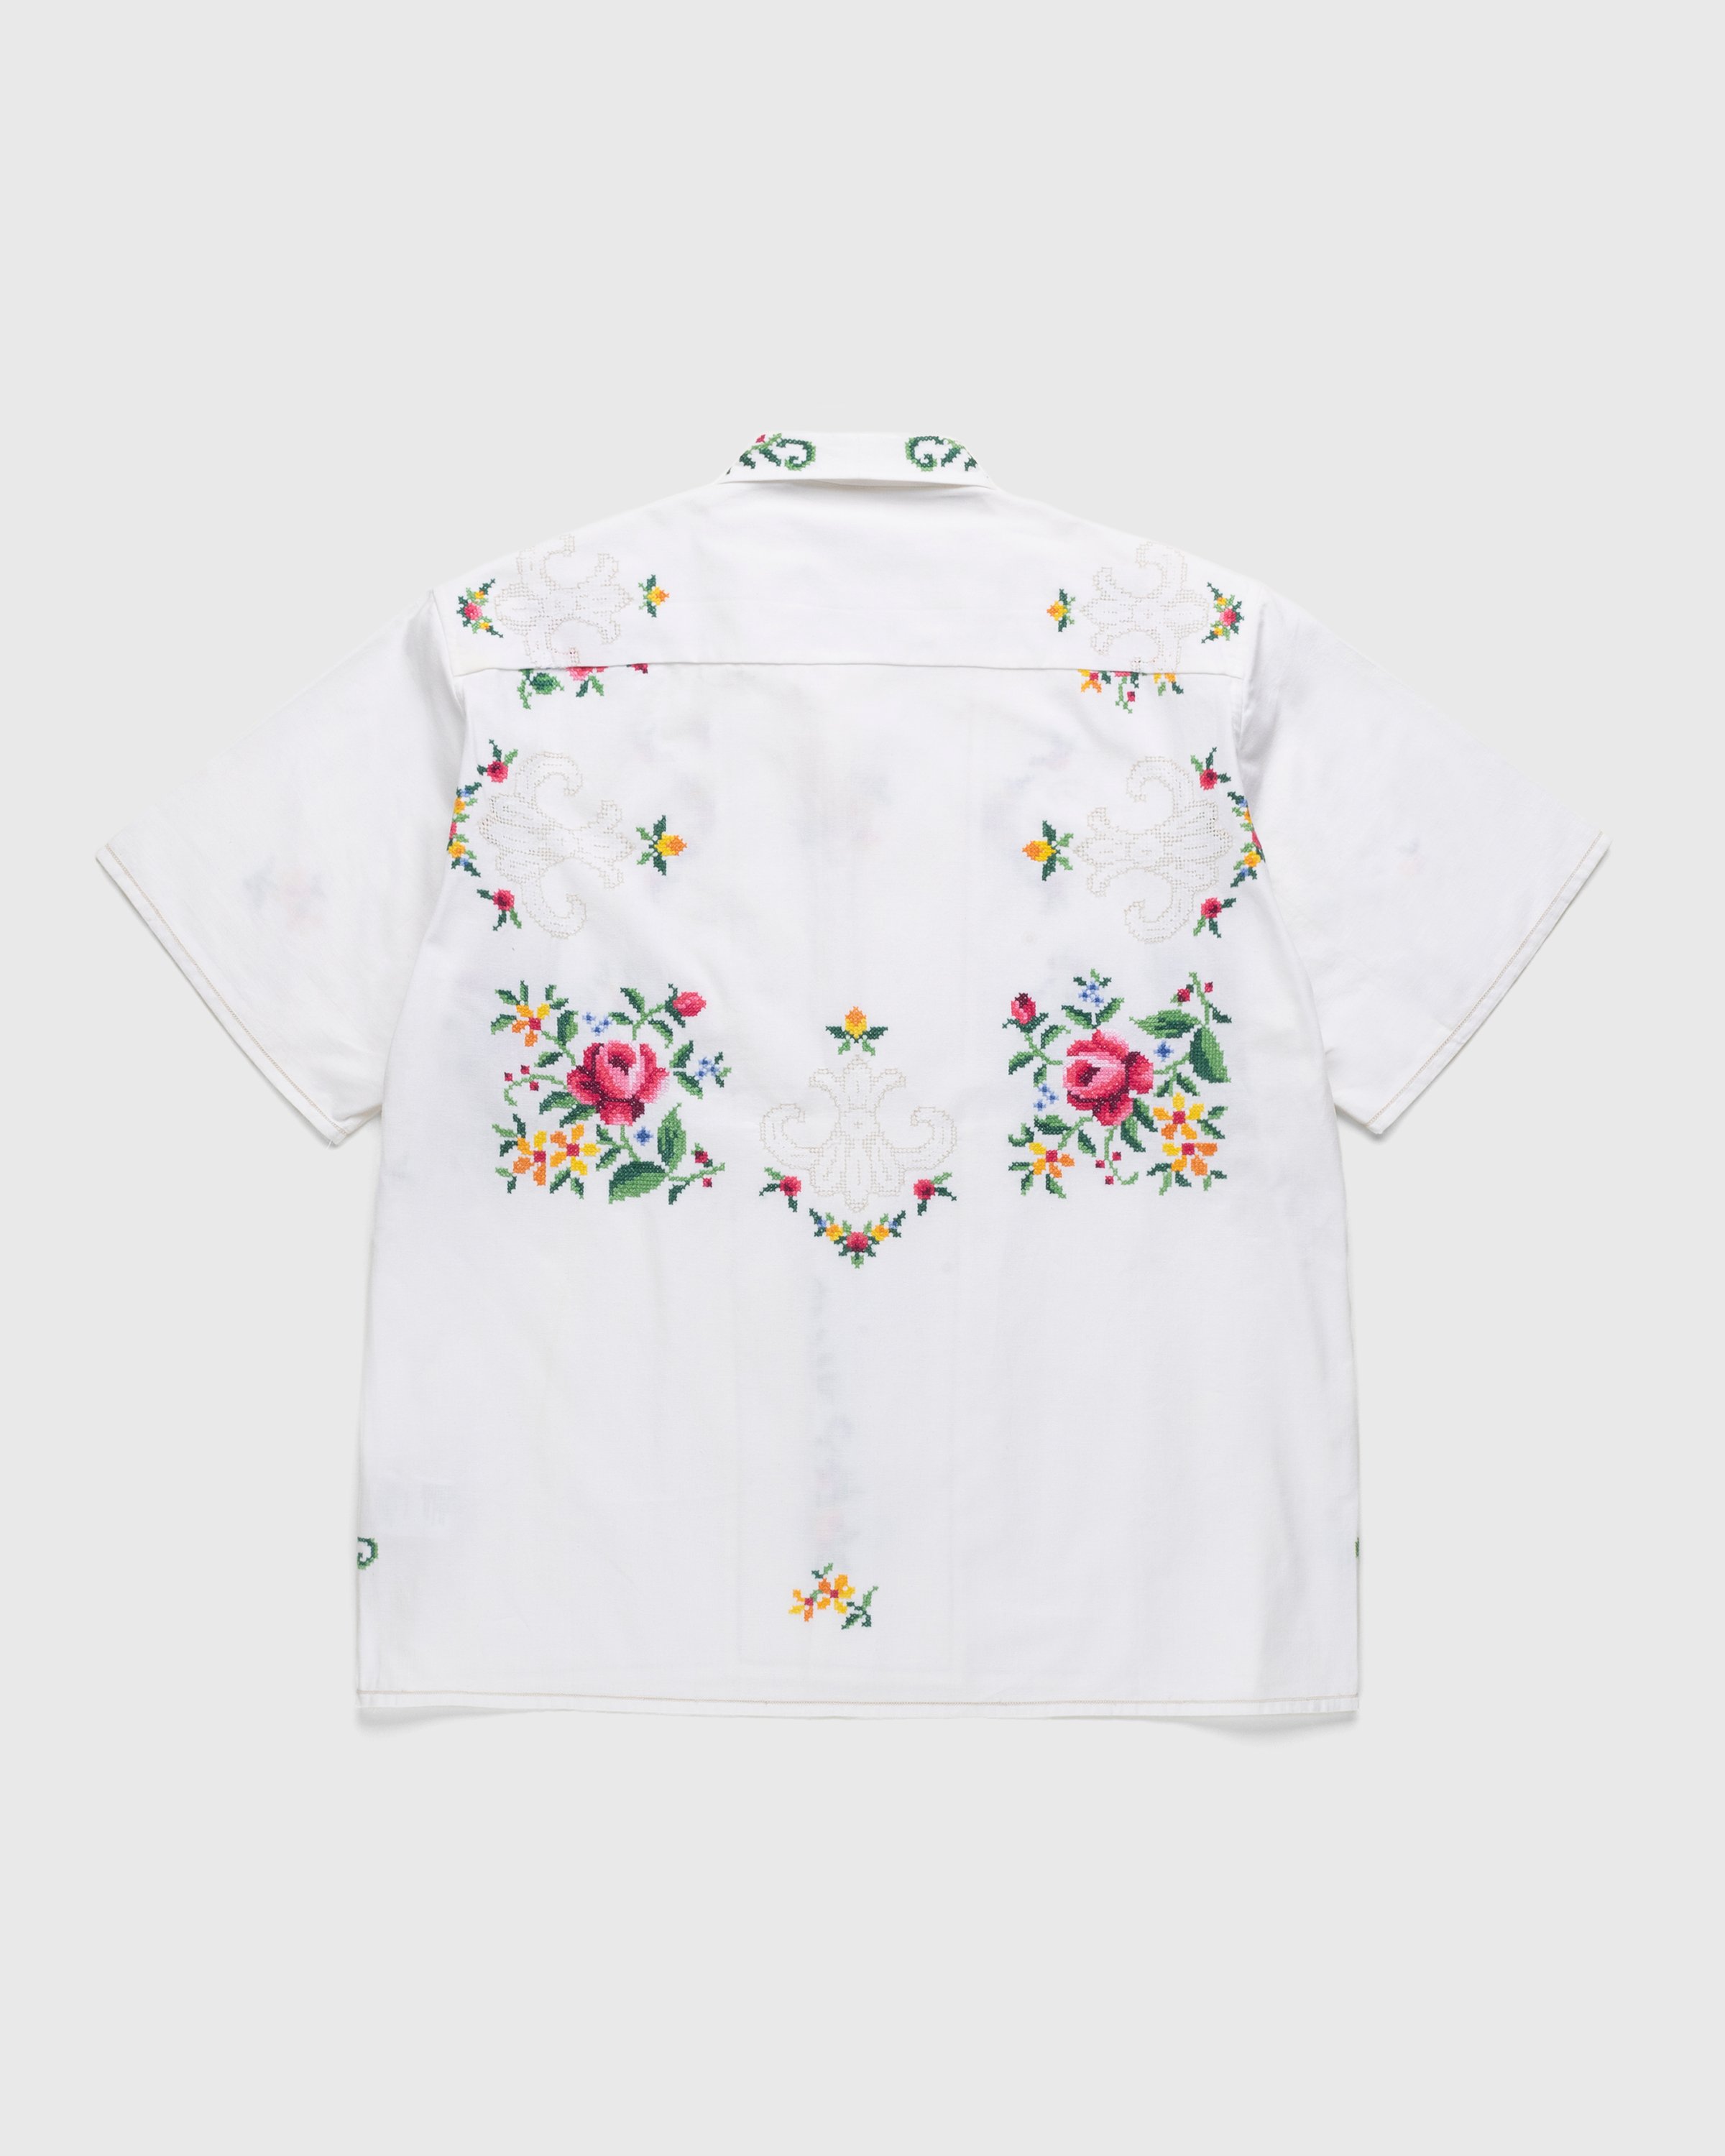 Diomene by Damir Doma - Embroidered Vacation Shirt White/Green - Clothing - White - Image 2